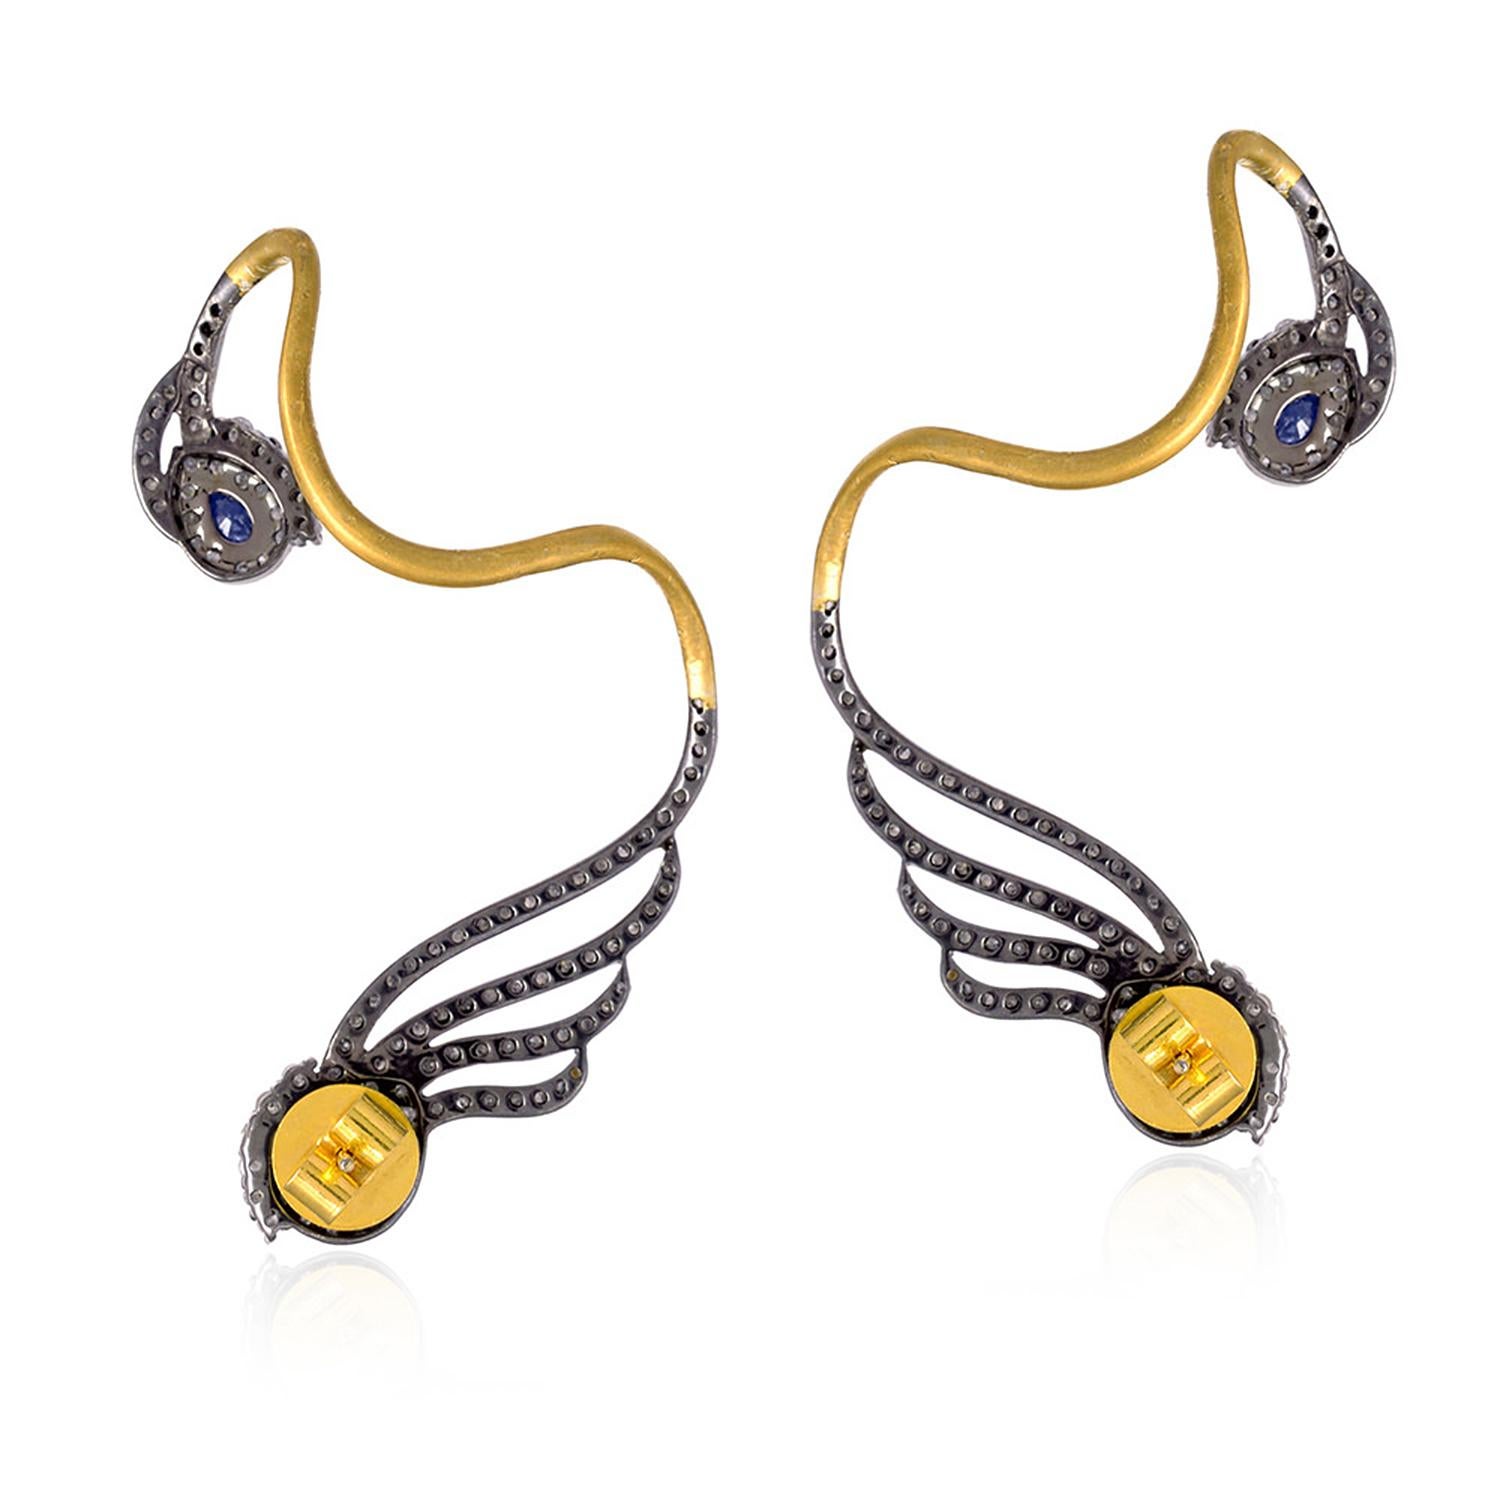 These beautiful ear climbers are handmade in 18-karat gold & sterling silver. It is set in 2.8 carats blue sapphire and 1.8 carats of glimmering diamonds. Show off their unique style by sweeping your hair back.

FOLLOW  MEGHNA JEWELS storefront to